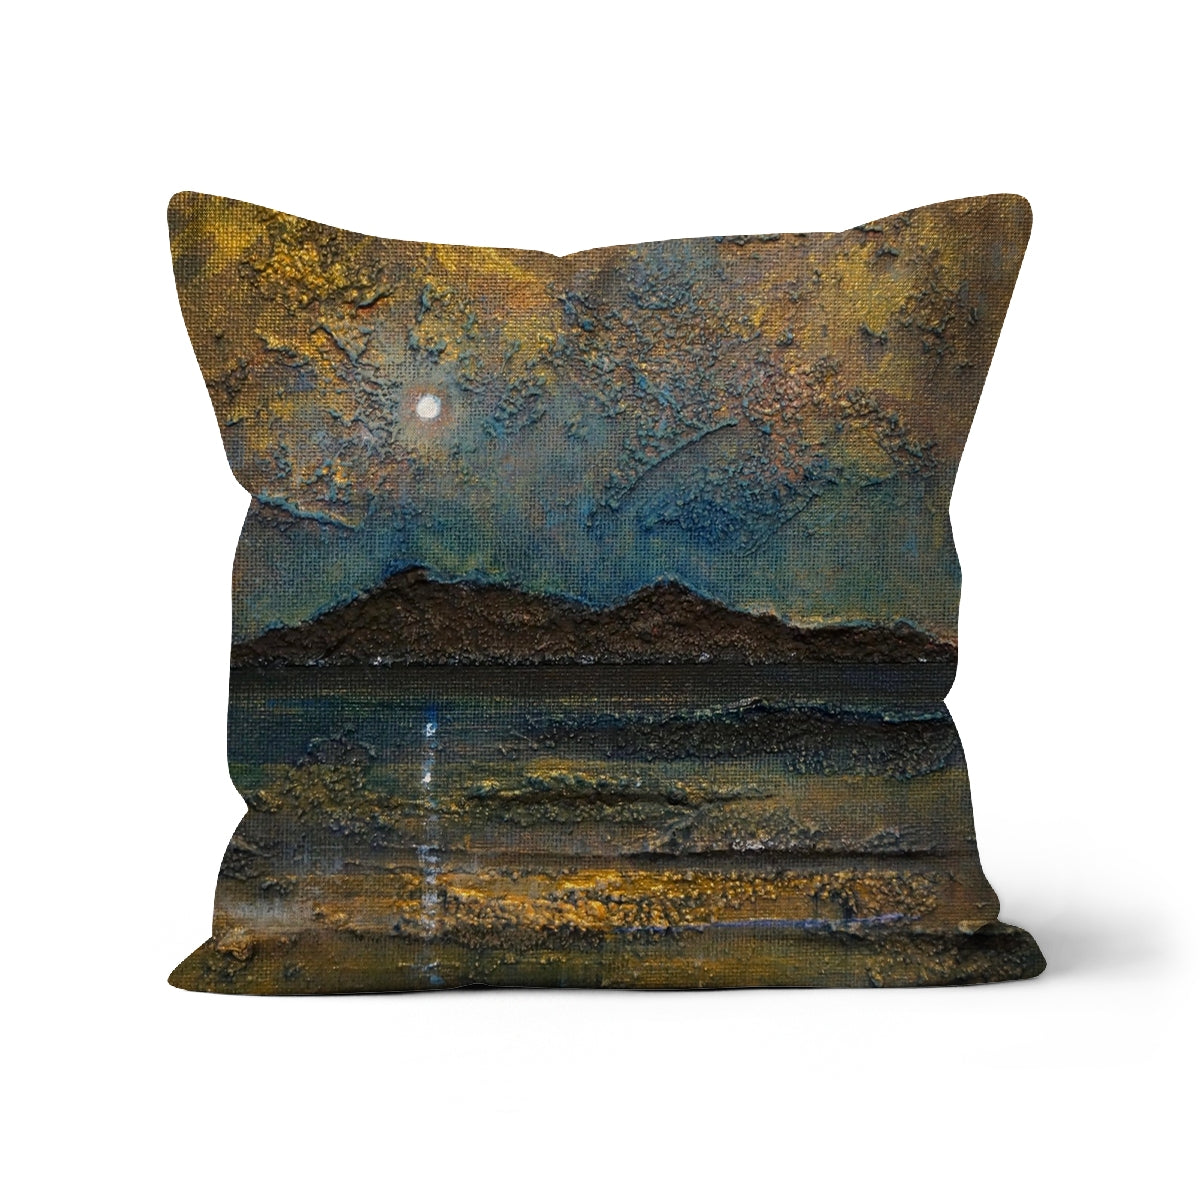 Arran Moonlight Art Gifts Cushion-Cushions-Arran Art Gallery-Faux Suede-22"x22"-Paintings, Prints, Homeware, Art Gifts From Scotland By Scottish Artist Kevin Hunter